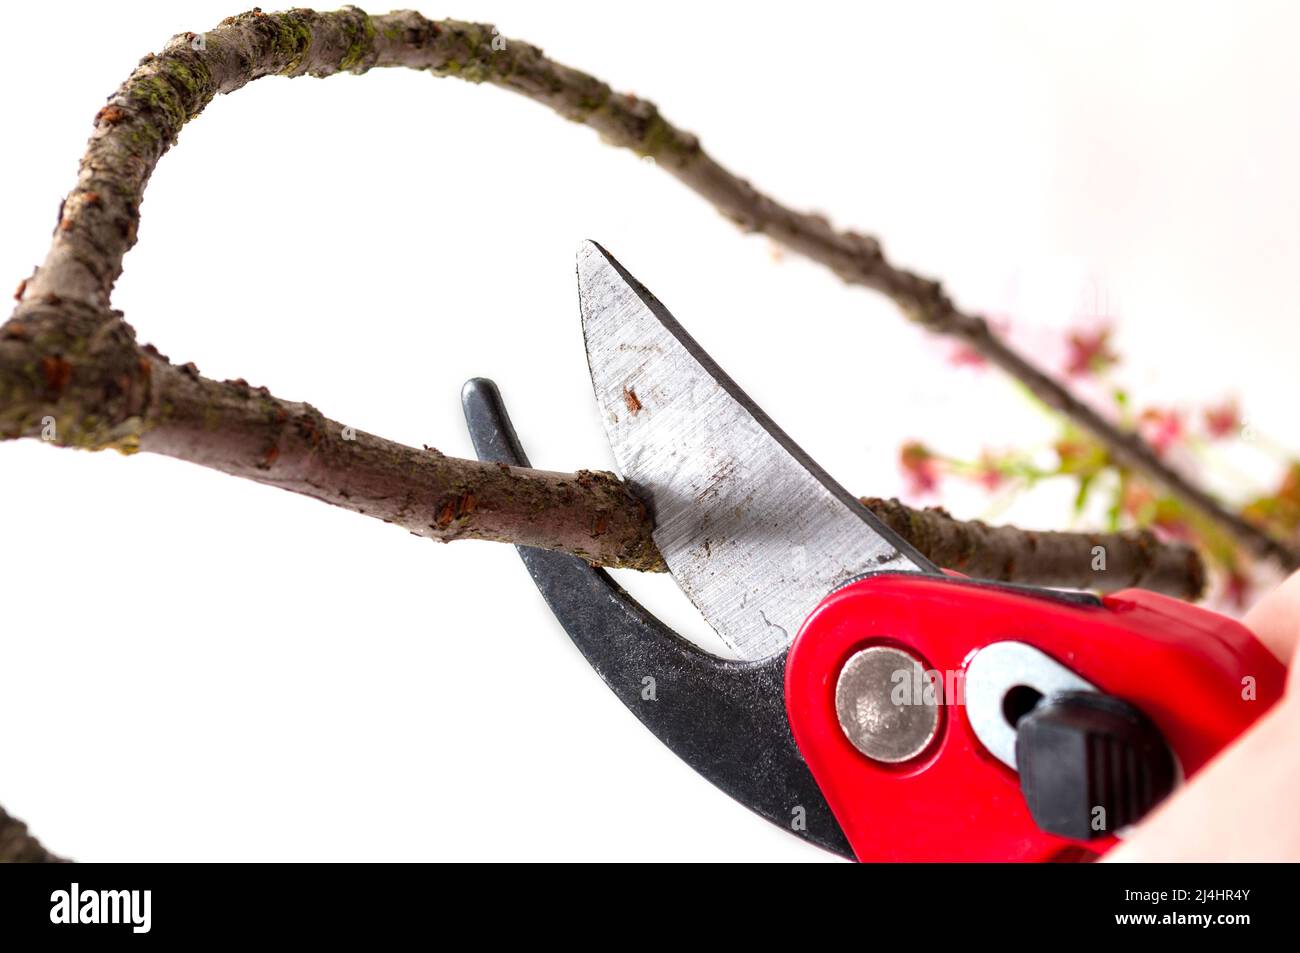 Pruning trees and trimming dead branches concept with secateurs pruning a tree branch on a white background. Pruning is a horticultural and silvicultu Stock Photo